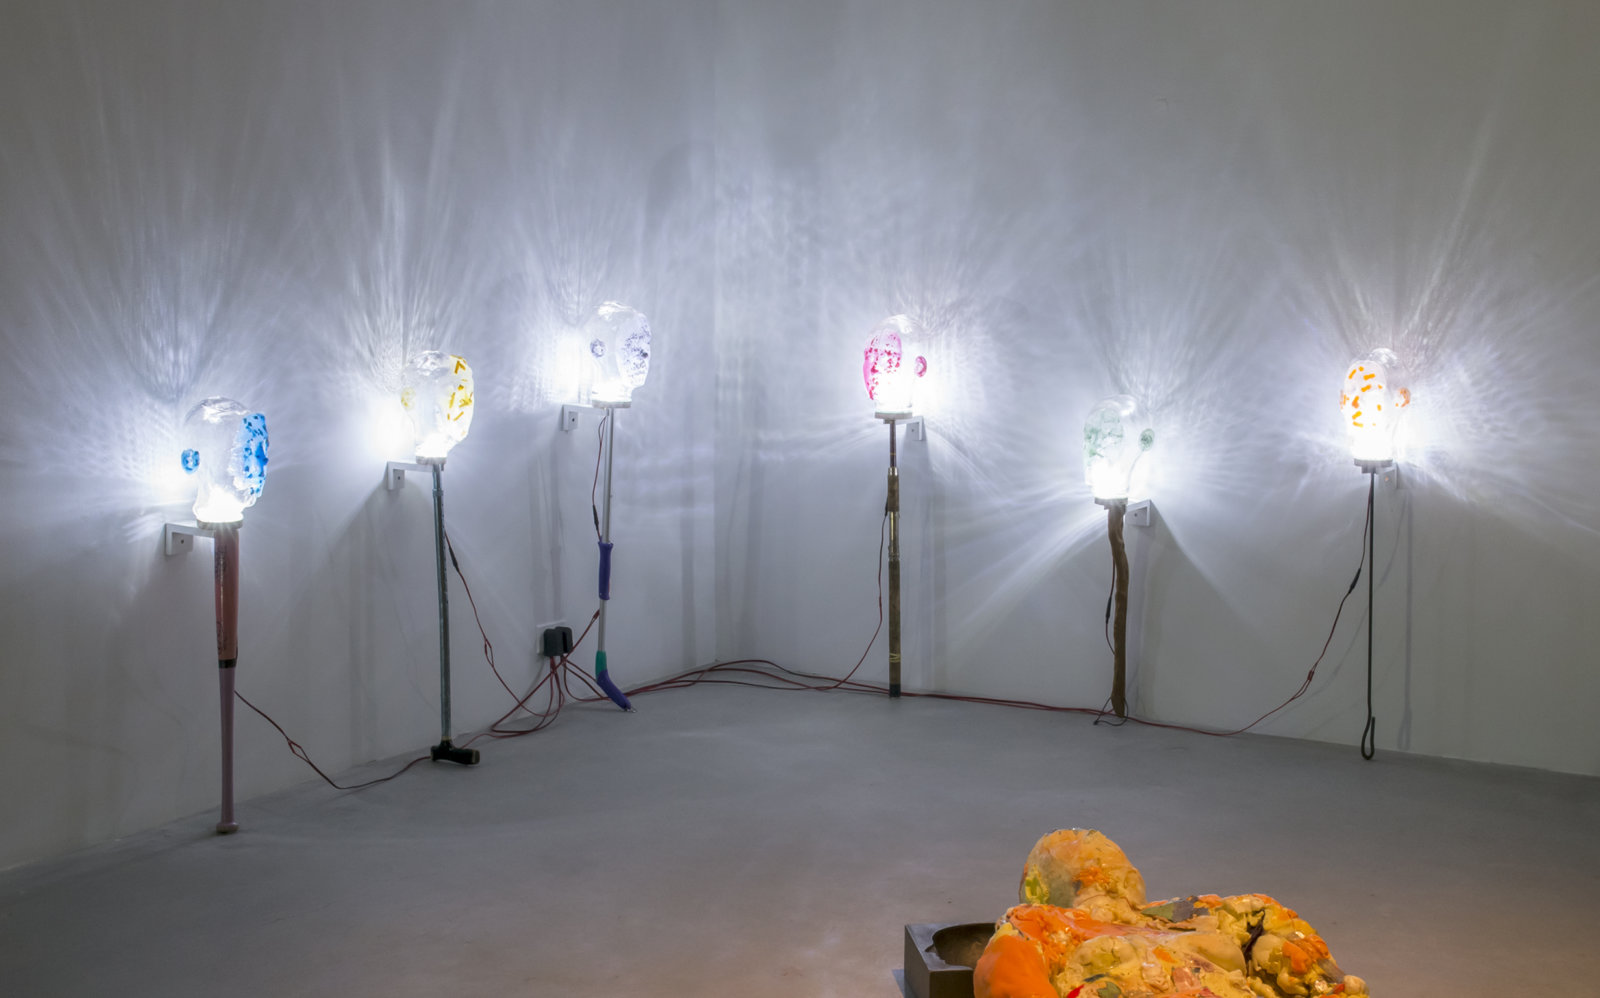 Kasper Feyrer, Witnesses, 2018, handblown glass, dyed silicone, LED lights, mixed media, dimensions variable. Installation view, Background Actors, Catriona Jeffries, Vancouver, 2018